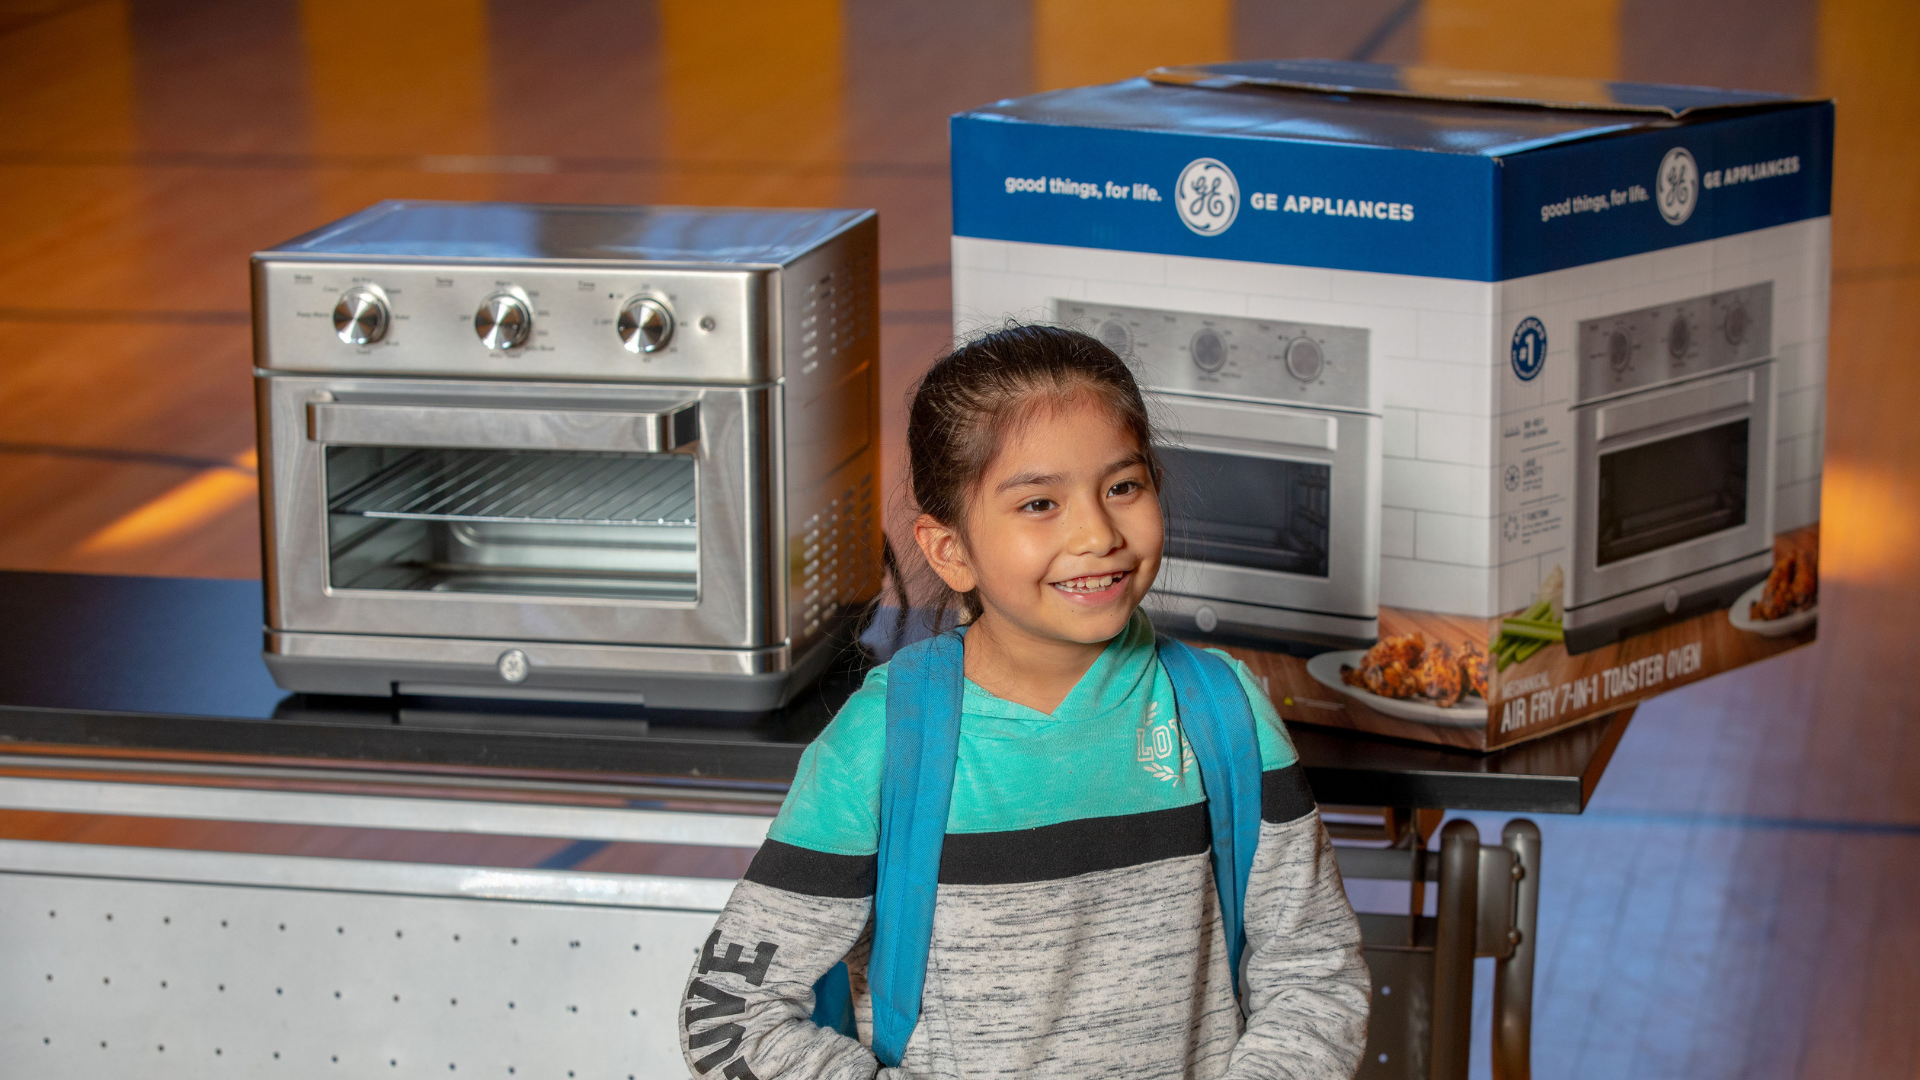 Young girl poses for photo in front of new toaster oven